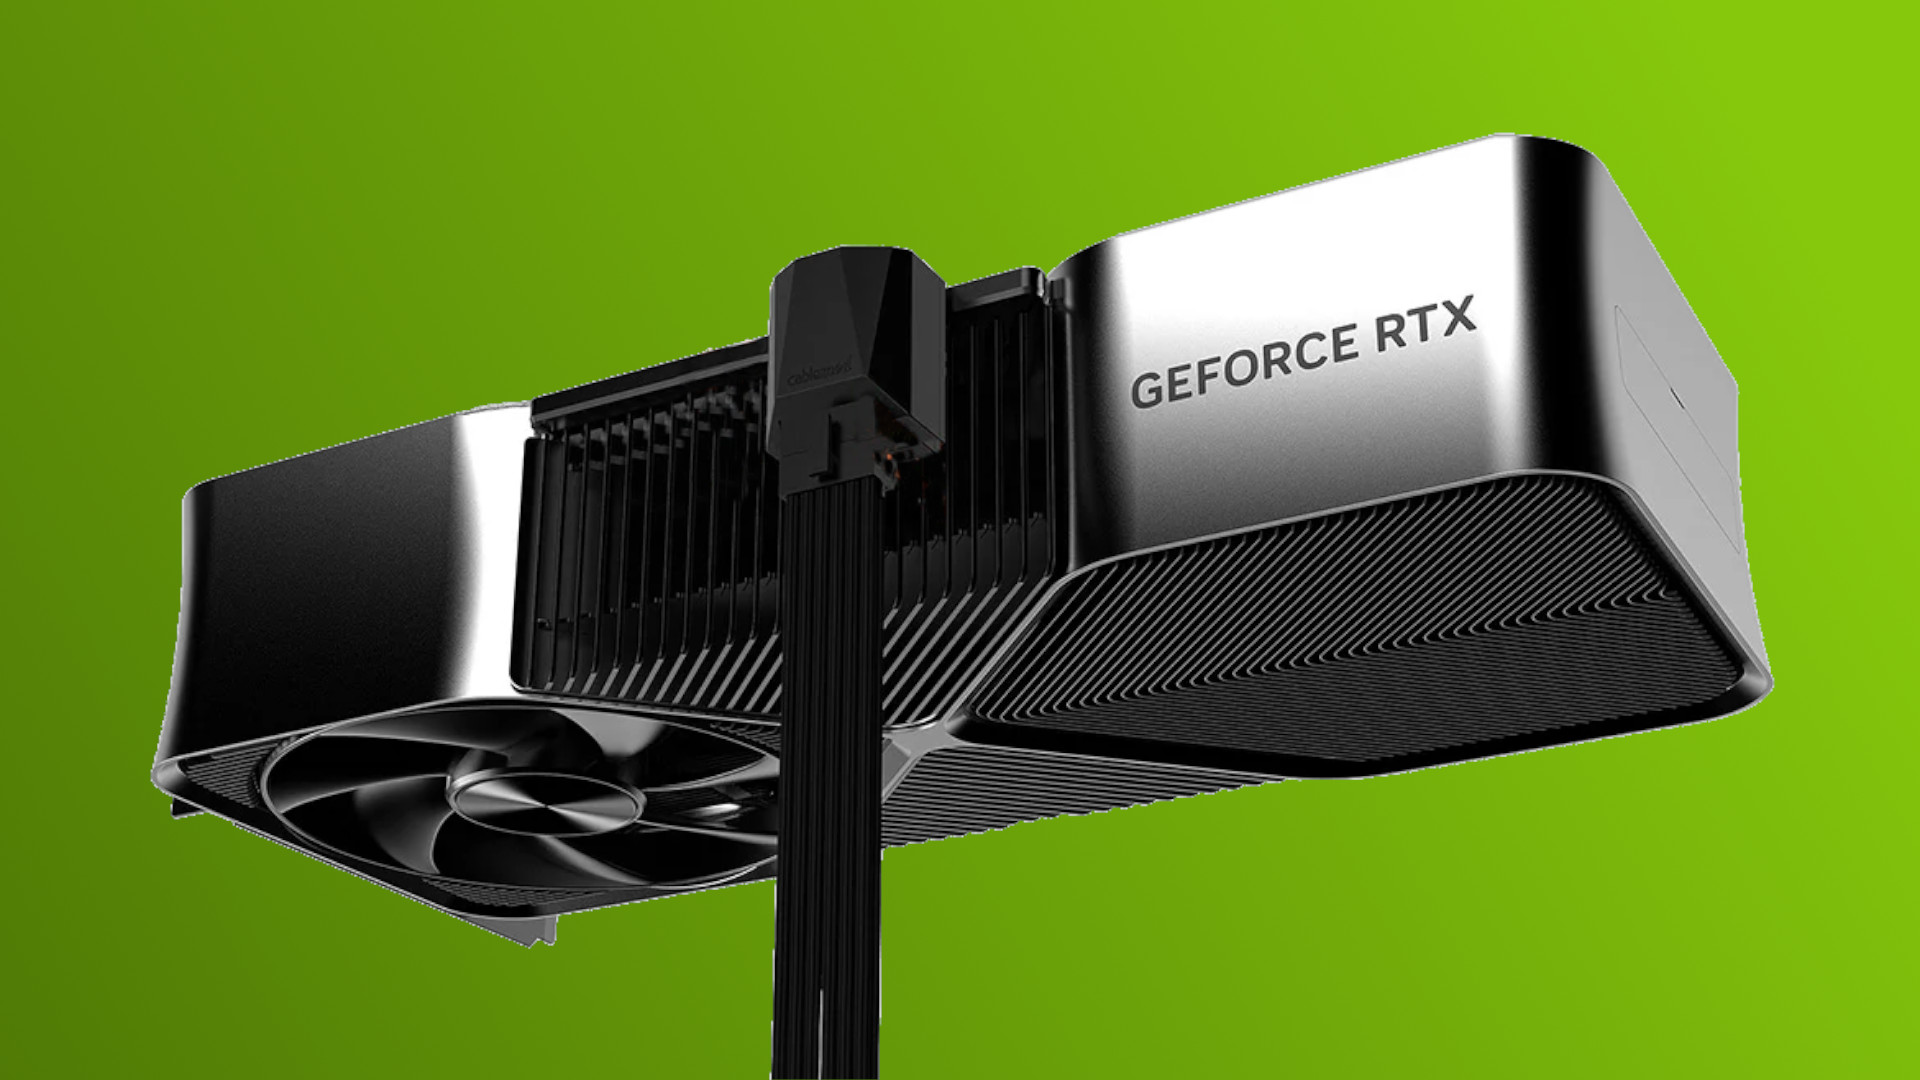 Cablemod Gpu Adapter Solves Poor Nvidia Rtx 4090 Port Placement World Tech News